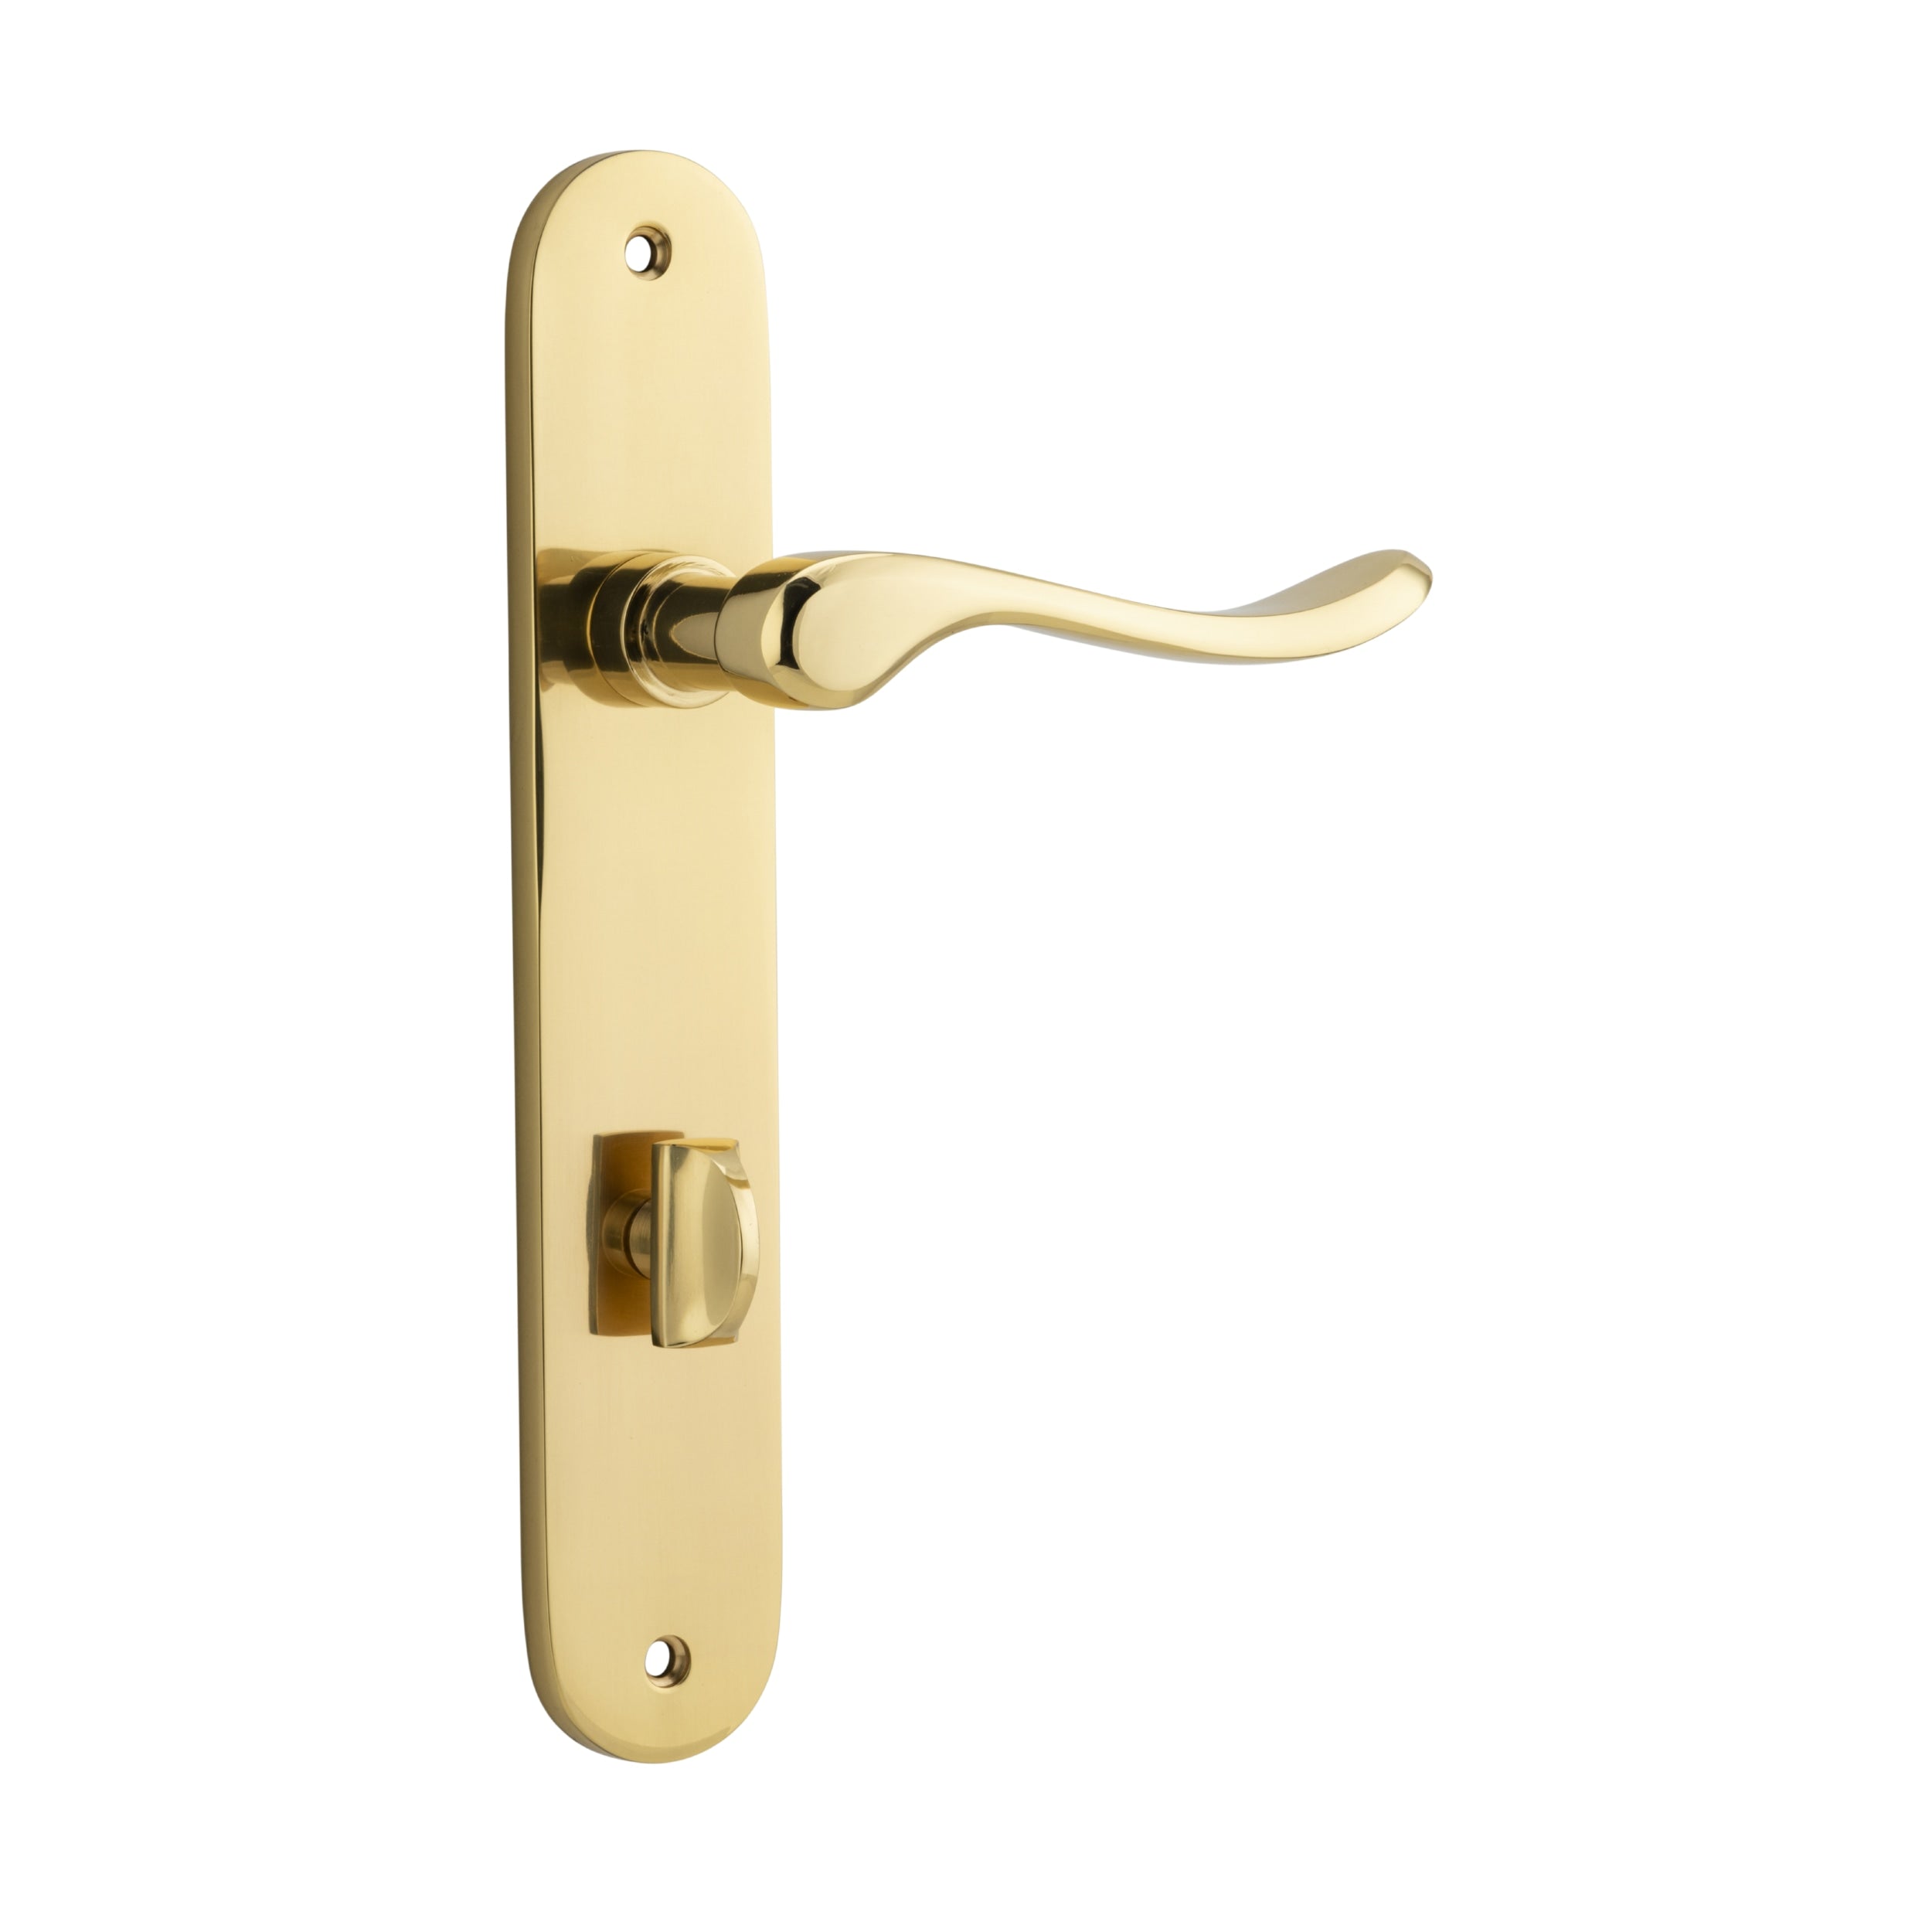 Iver Door Handle Stirling Oval Privacy Pair Polished Brass